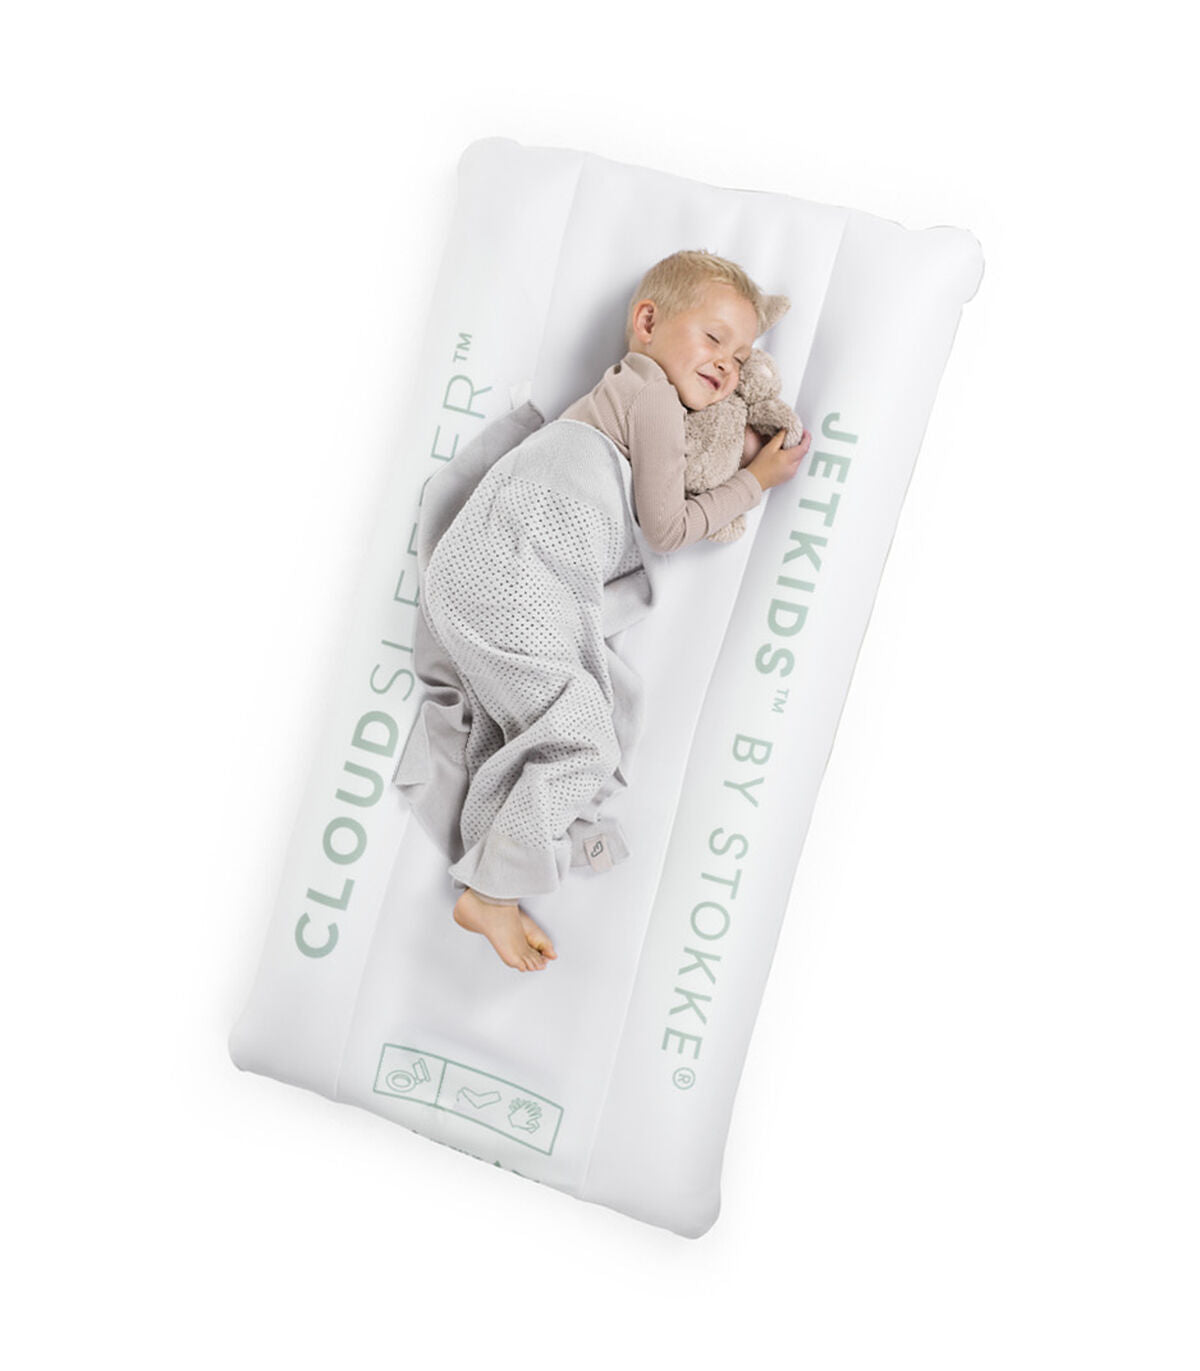 JetKids™ by Stokke CloudSleeper™ Inflatable Kids’ Bed